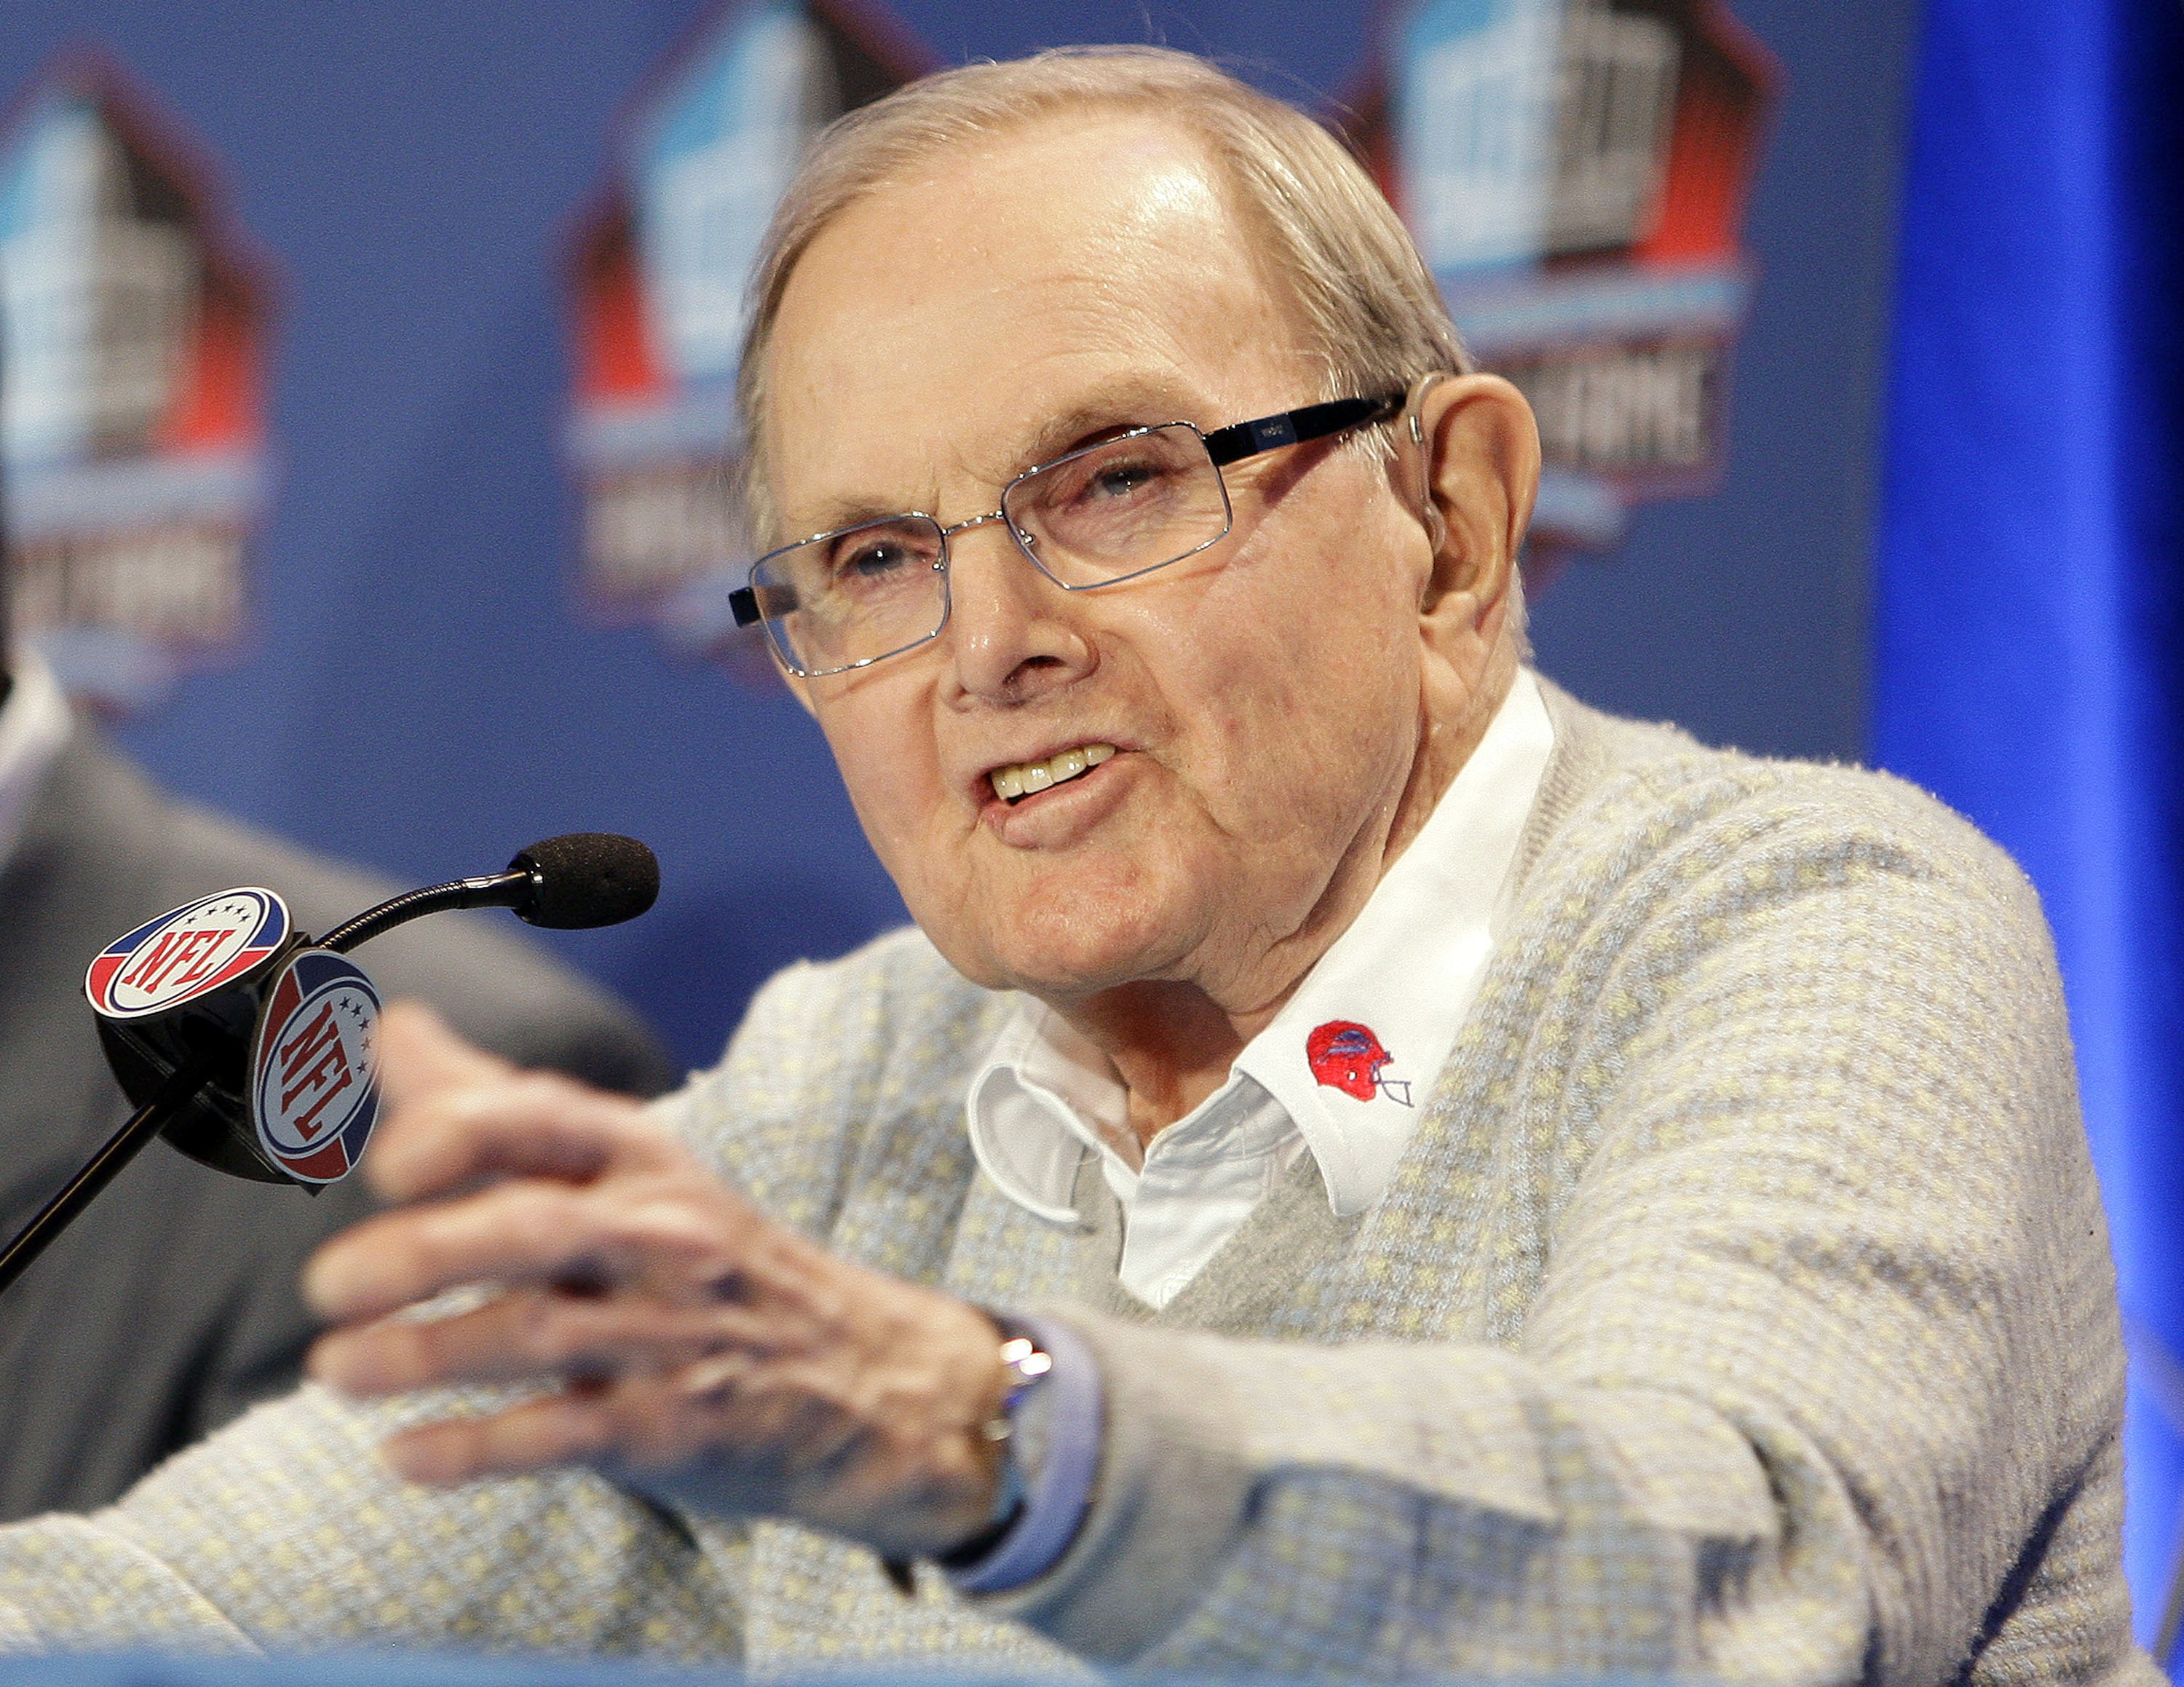 Buffalo Bills owner Ralph Wilson gestures during a news conference in Tampa, Fla. on Jan. 31, 2009. (Chris O'Meara—AP)